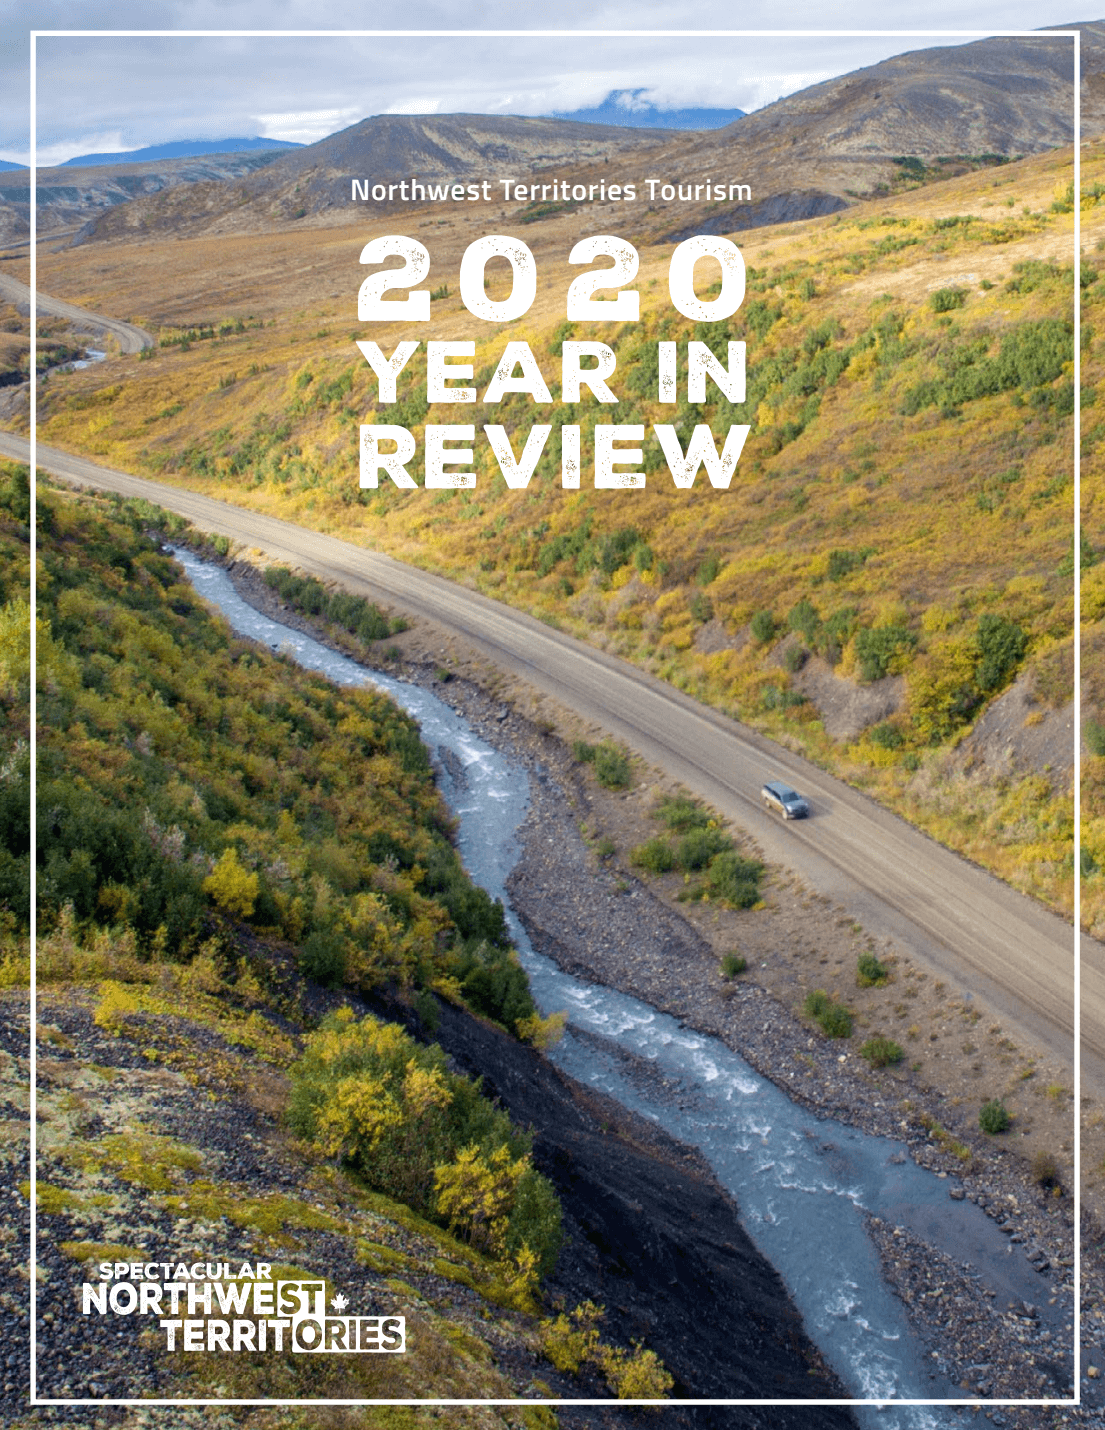 NWT Tourism Year in Review 2020